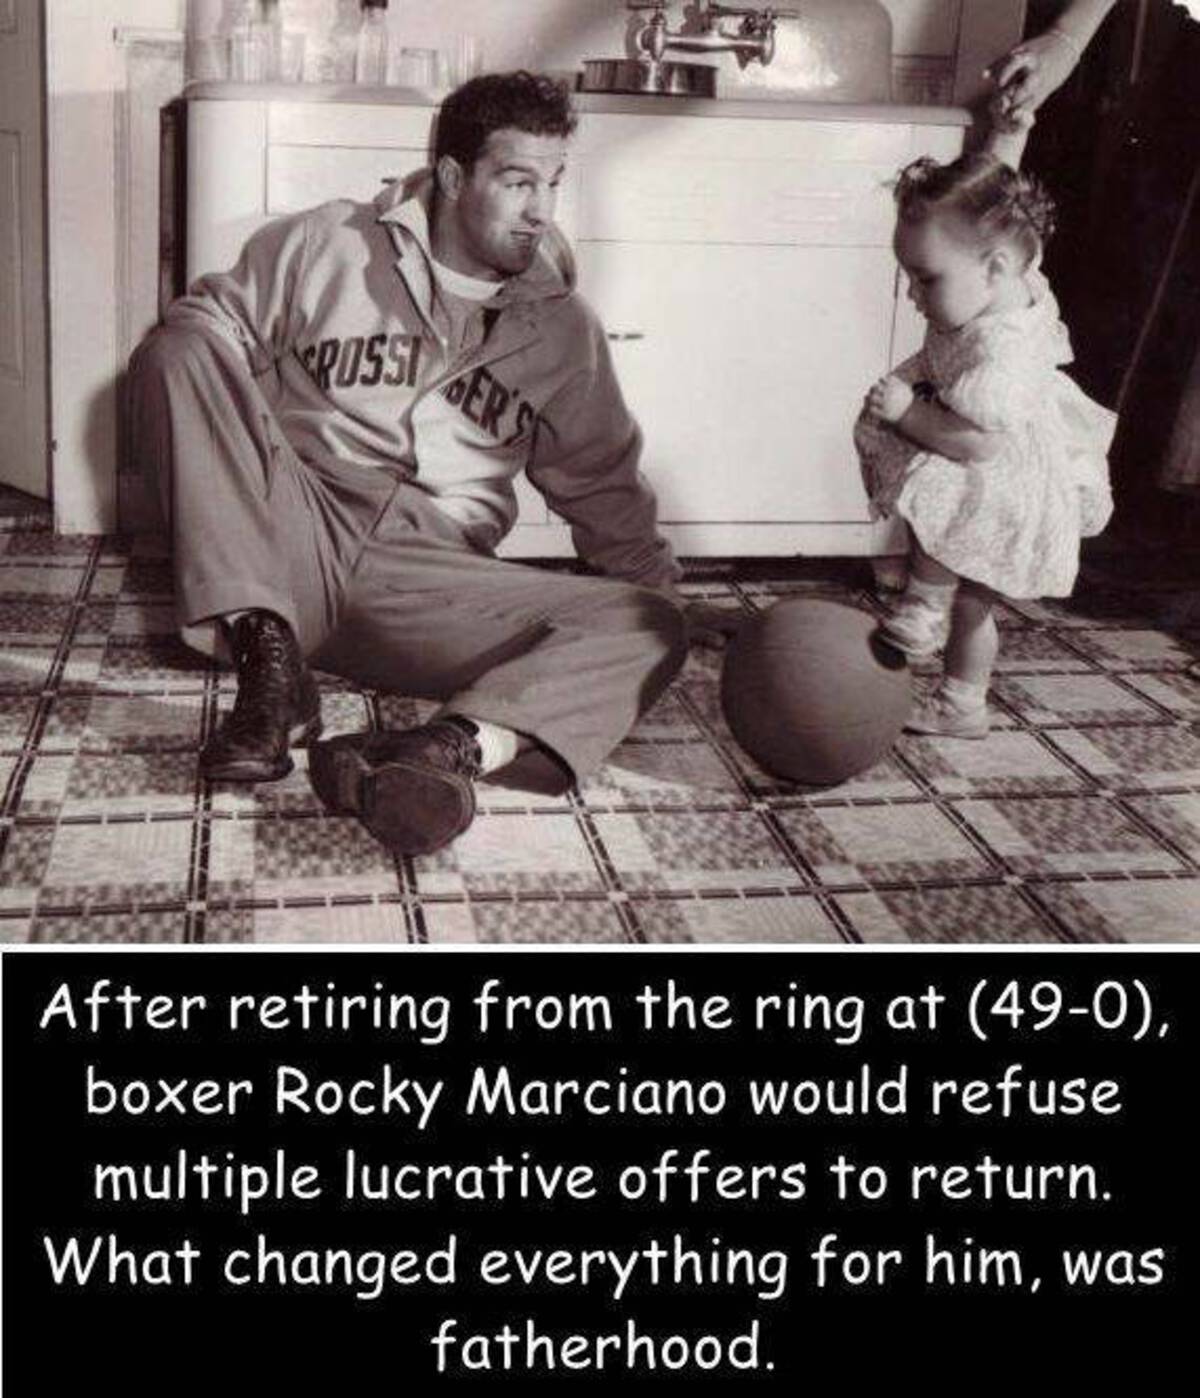 rocky marciano daughter - Possi Ger'S After retiring from the ring at 490, boxer Rocky Marciano would refuse multiple lucrative offers to return. What changed everything for him, was fatherhood.